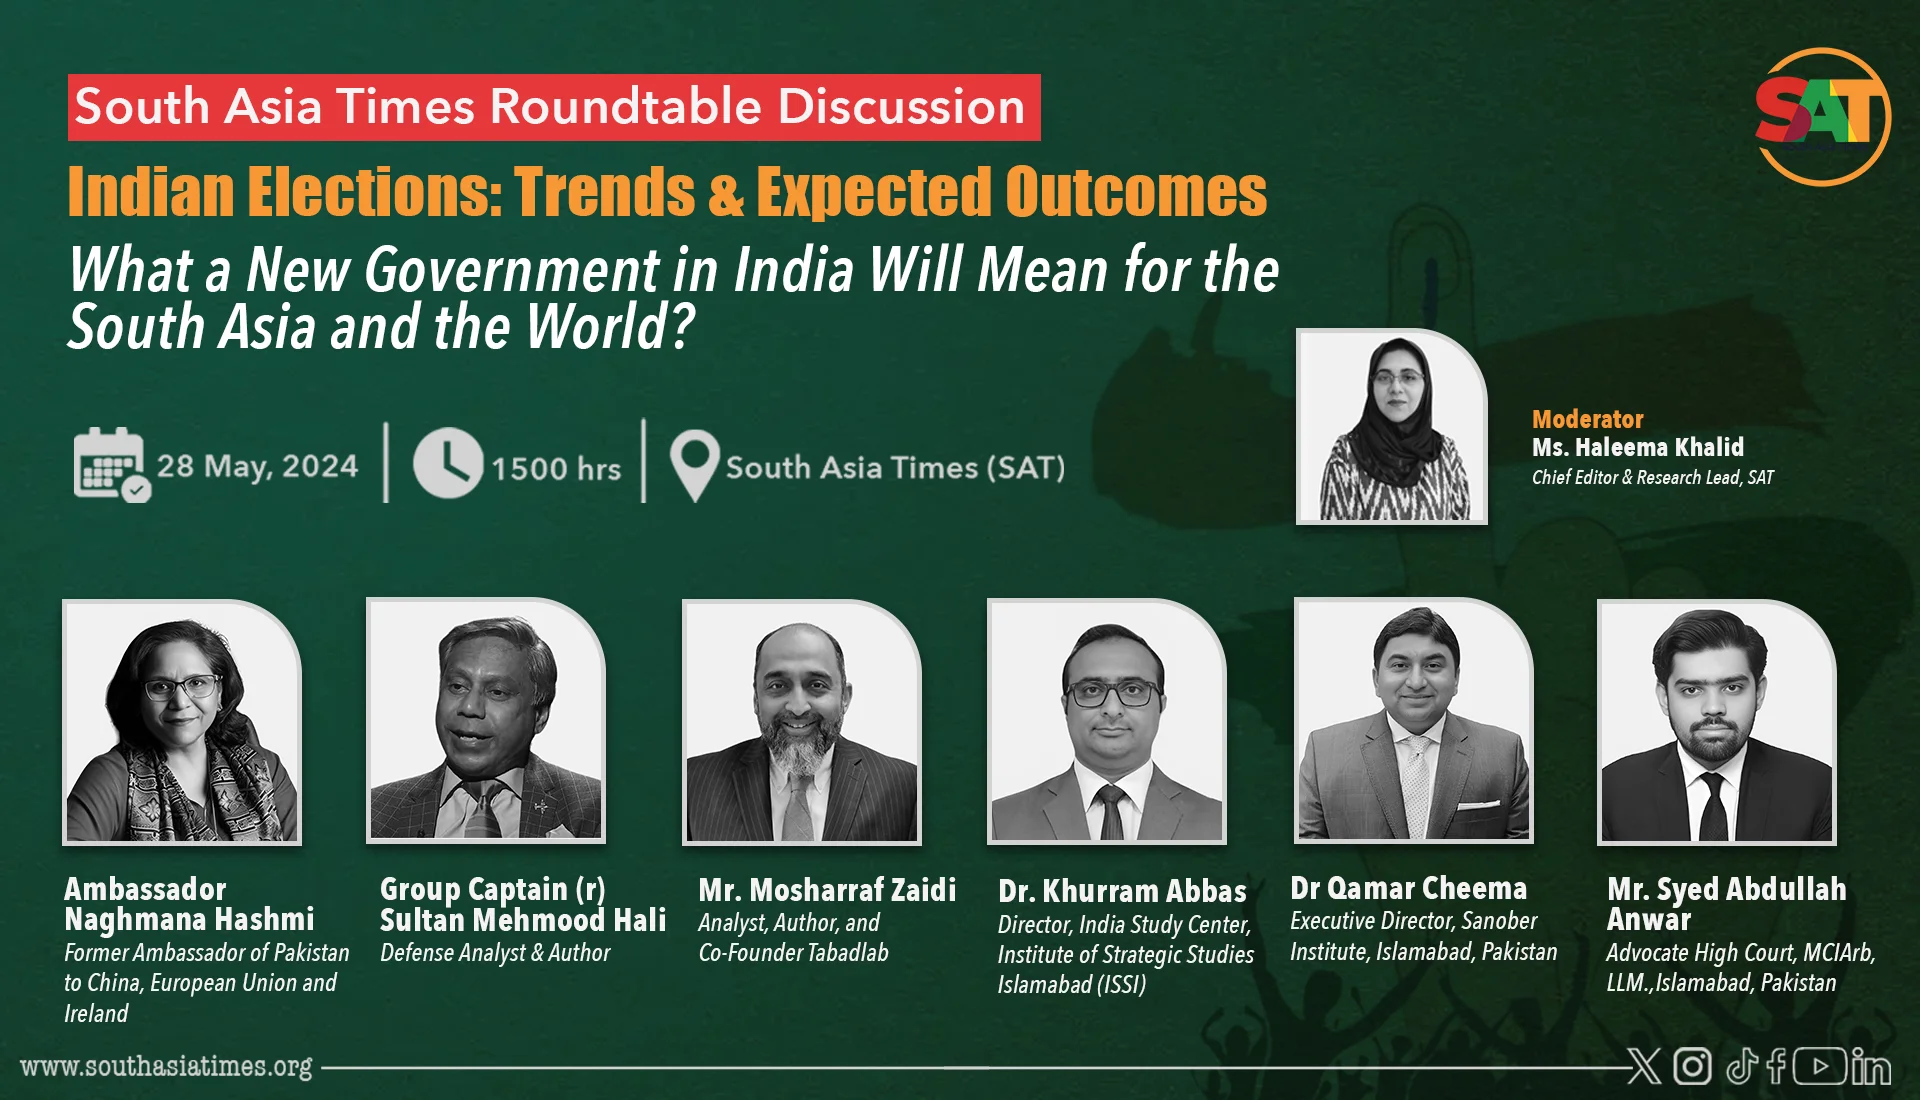 South Asia Times (SAT) hosts expert panelists to discuss trends, outcomes, and global impact of Indian elections.